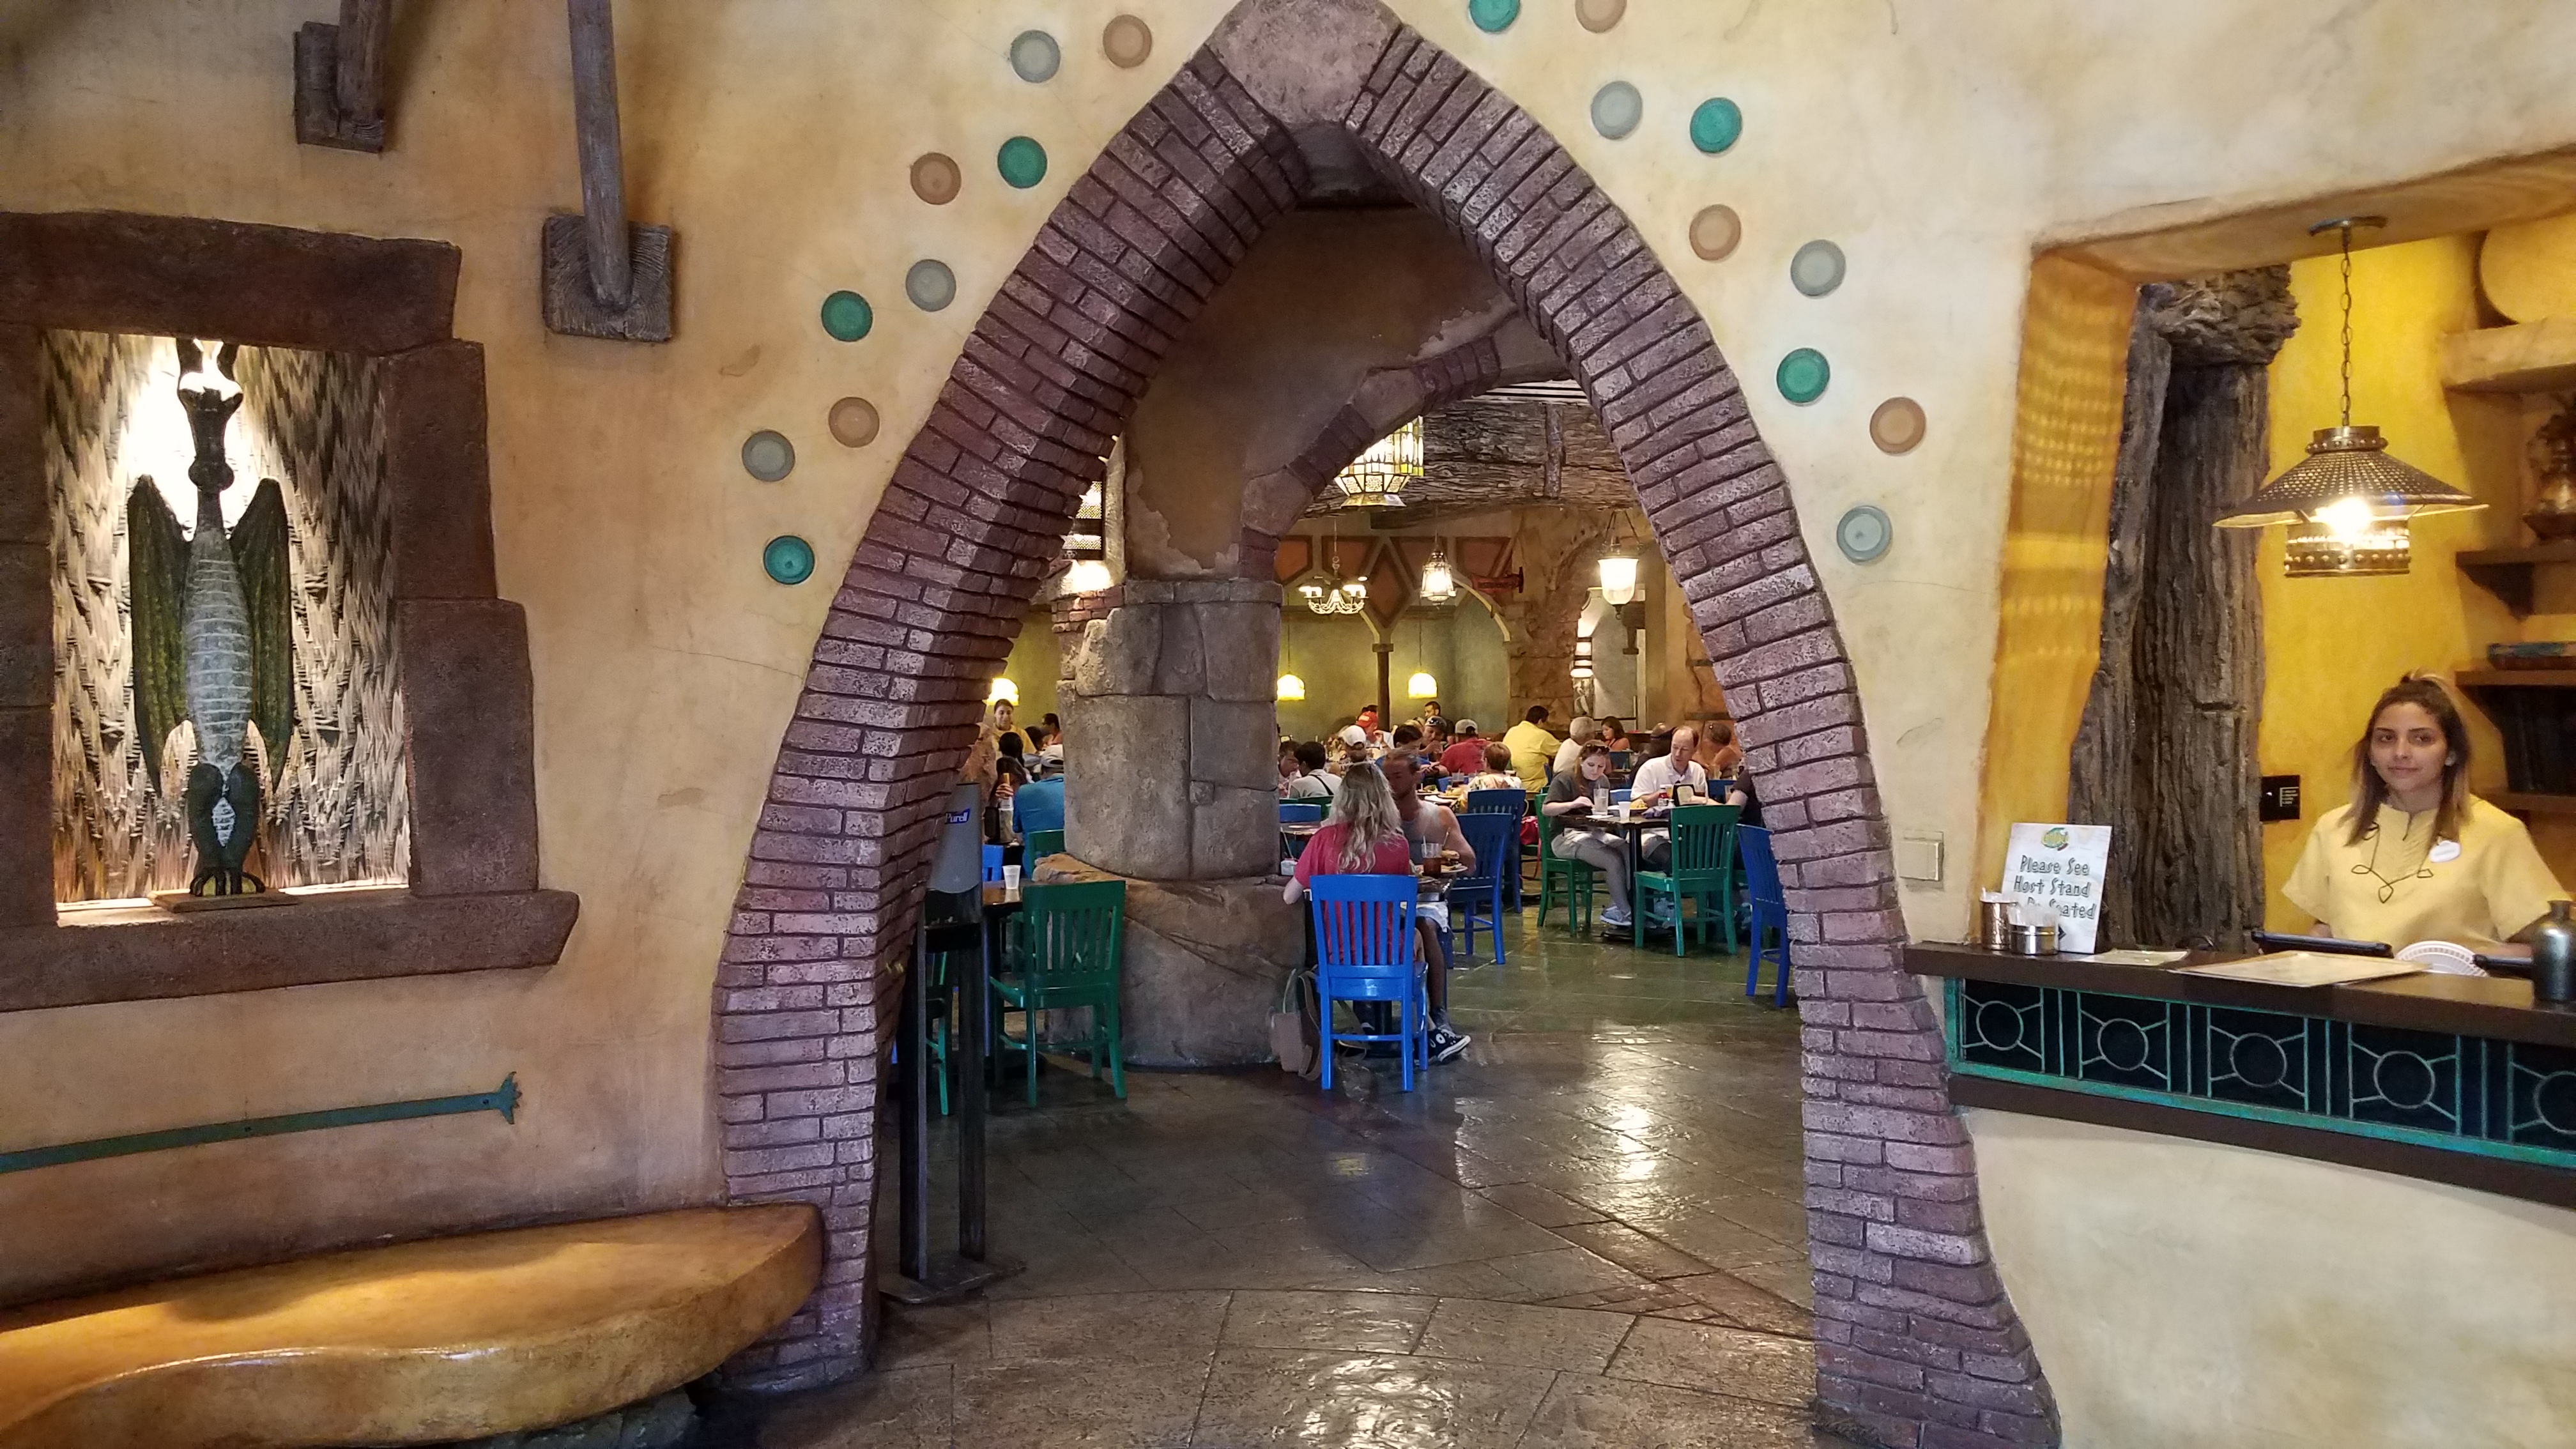 Resultaat Renaissance Overtreding Dining Review: Confisco Grille - Unofficial Universal